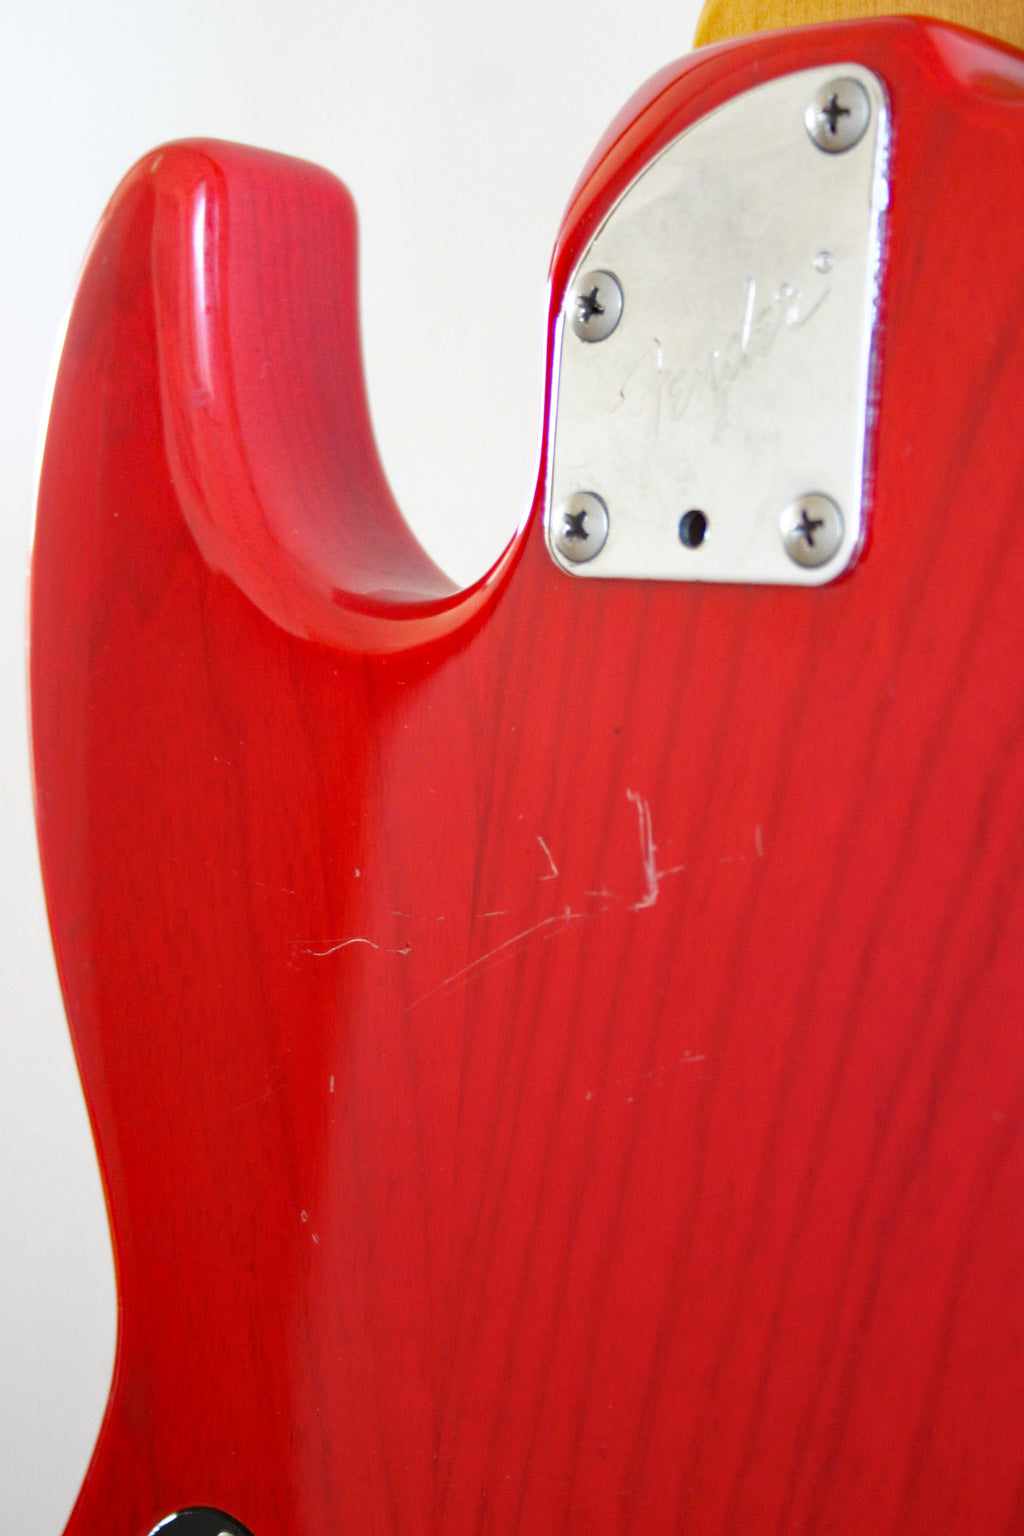 Used Fender Jazz Bass Active Trans Red 1987-88